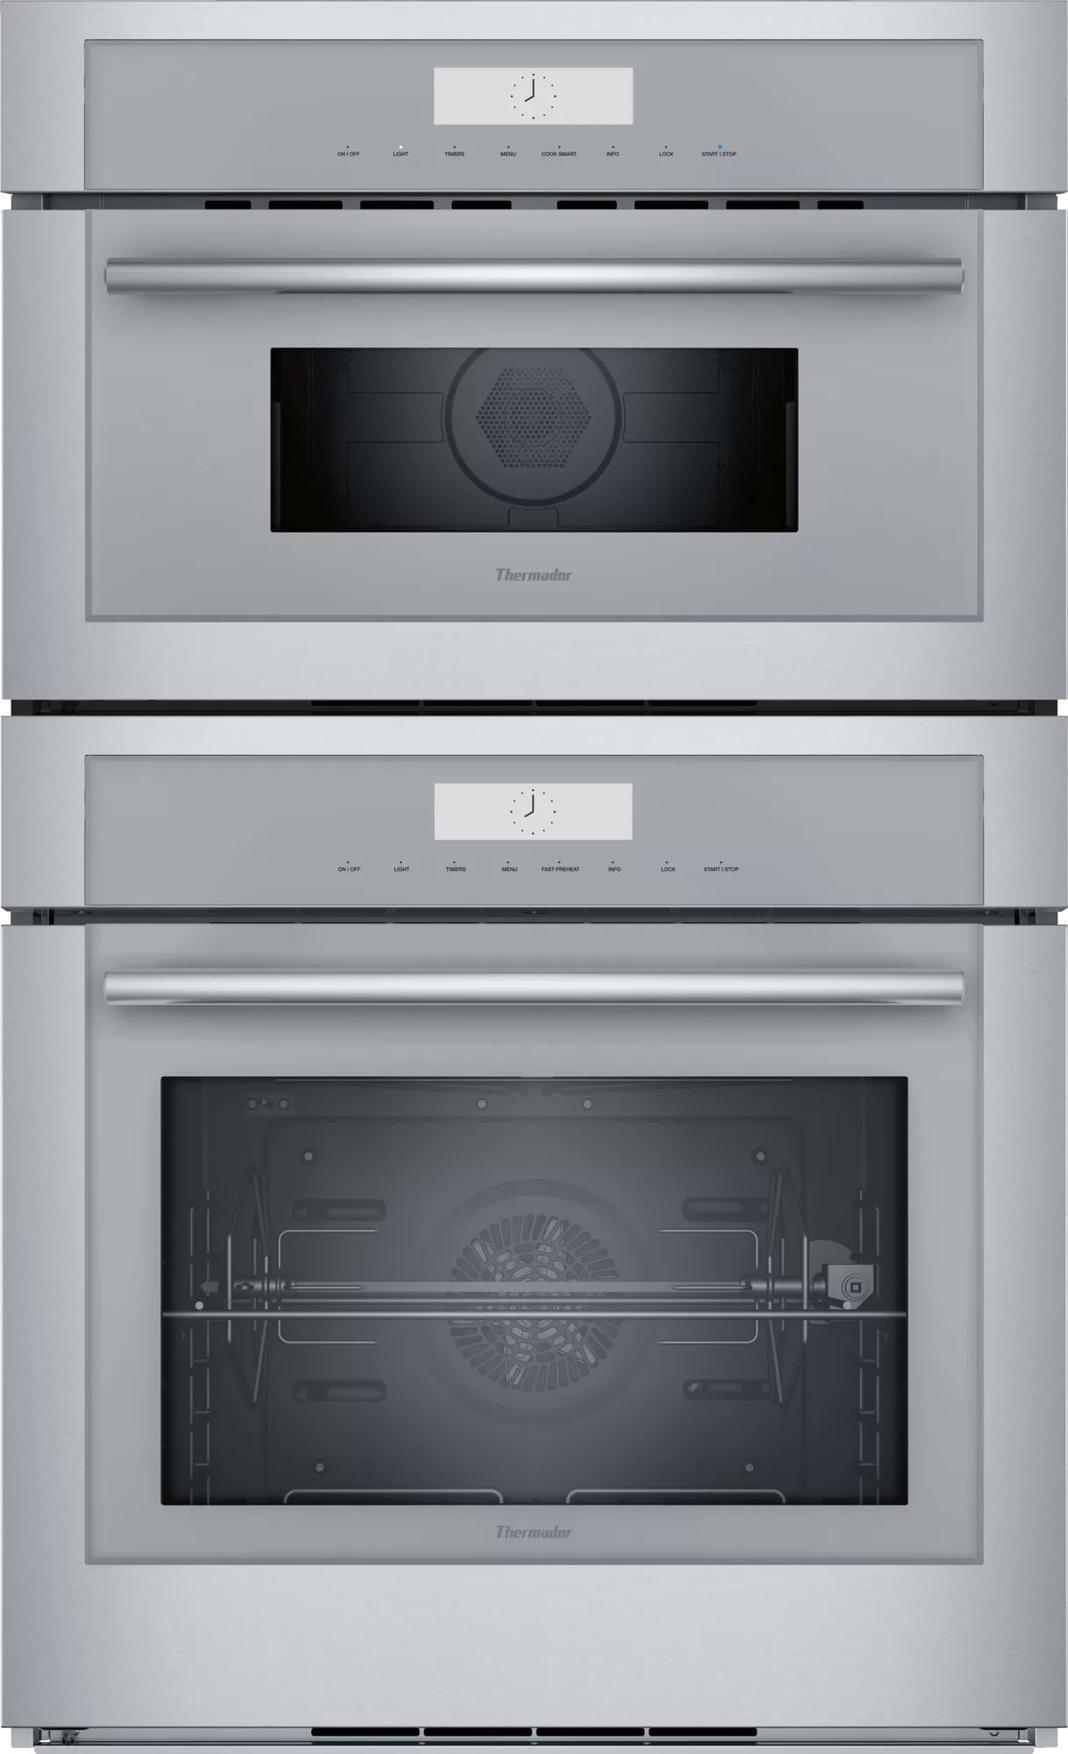 Thermador - 6.1 cu. ft Combination Oven in Stainless - MEDMC301WS